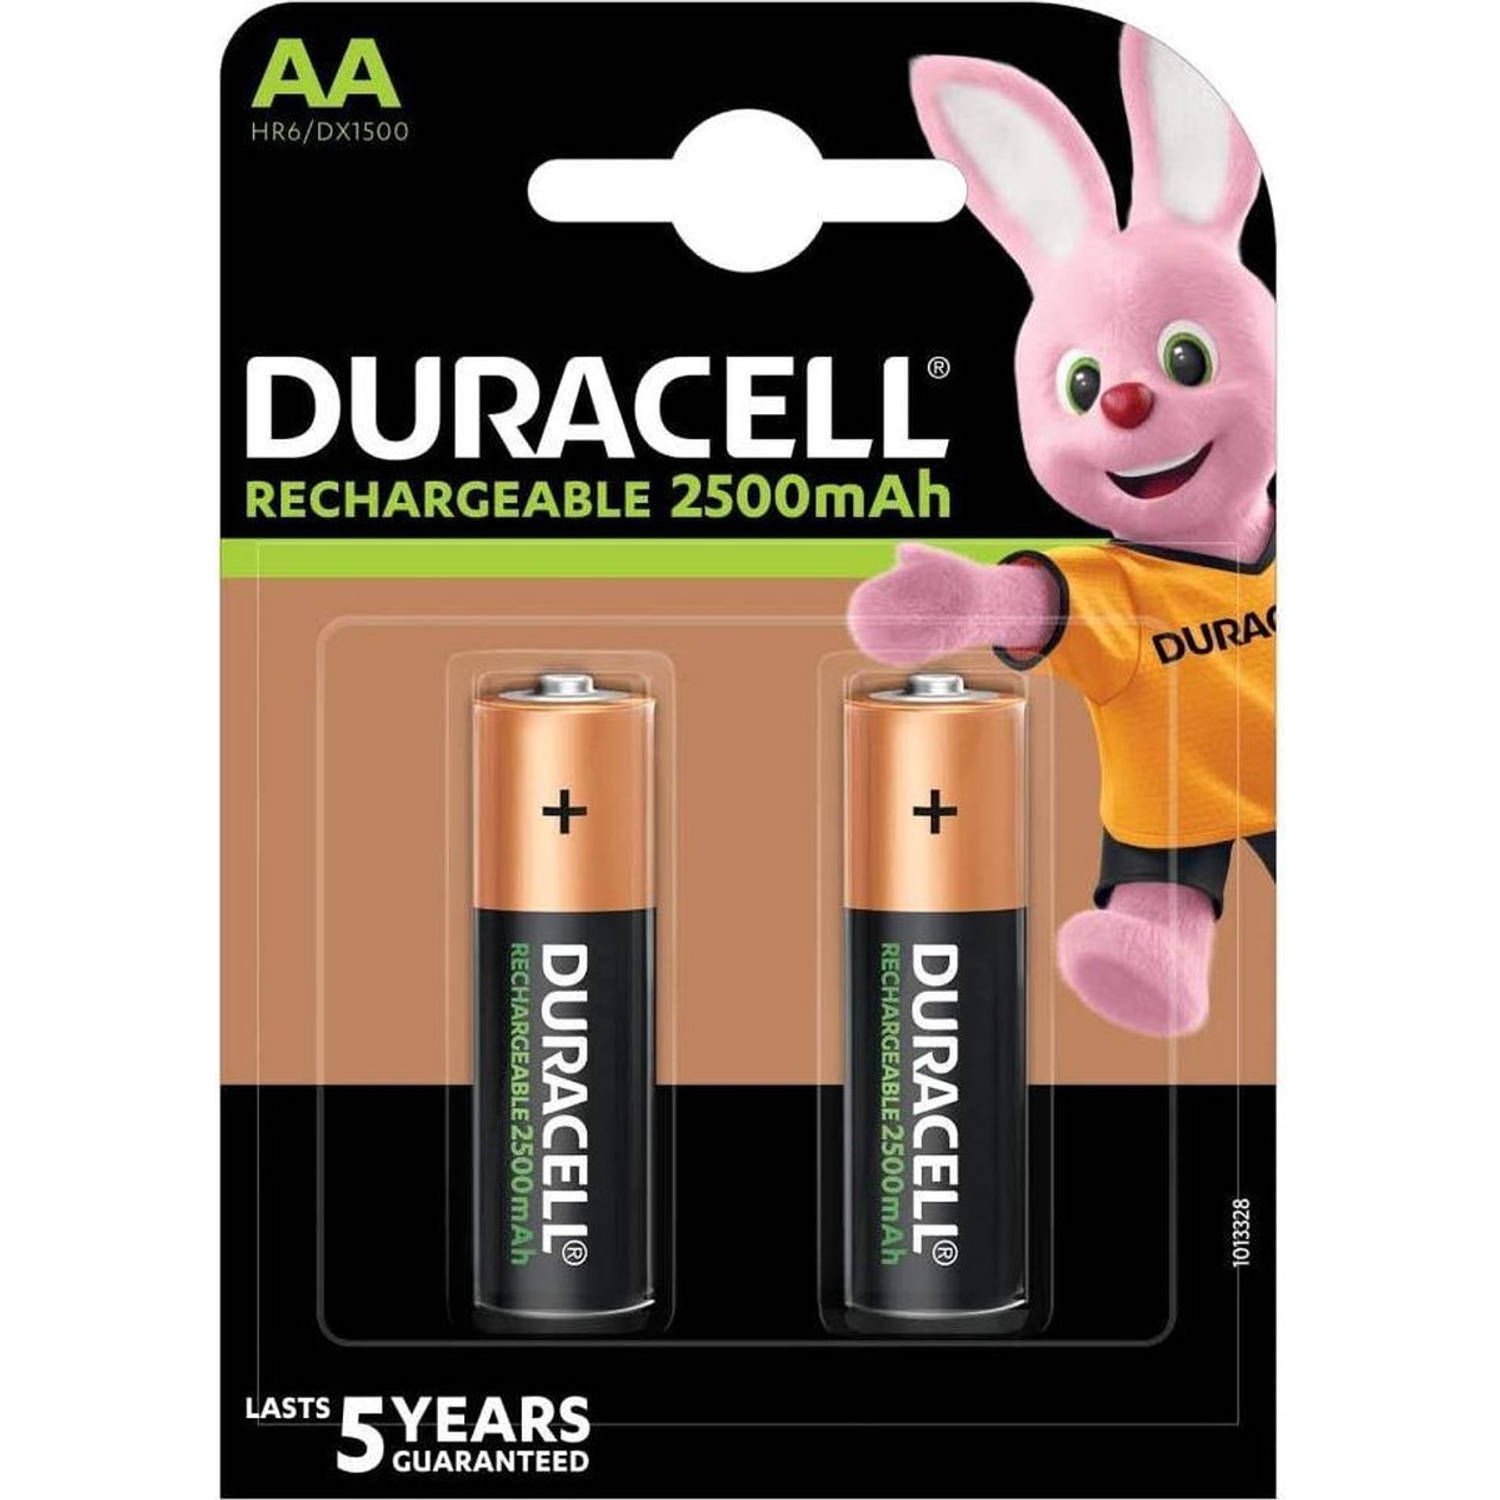 Duracell Rechargeable Stay Charged AA/HR6 2500mAh blister 2